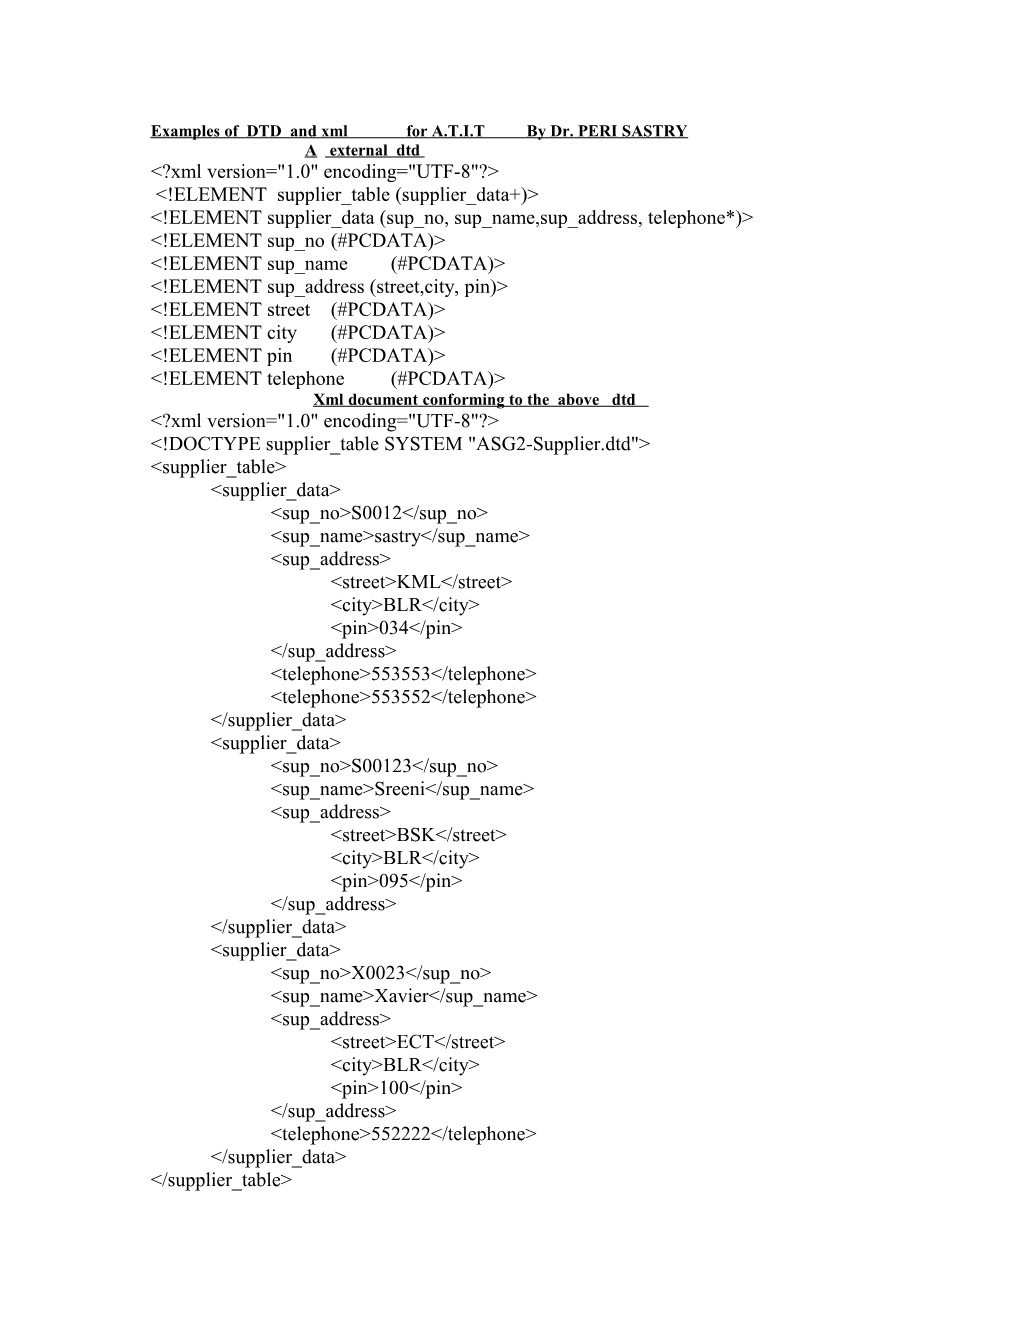 Examples of DTD and Xml for A